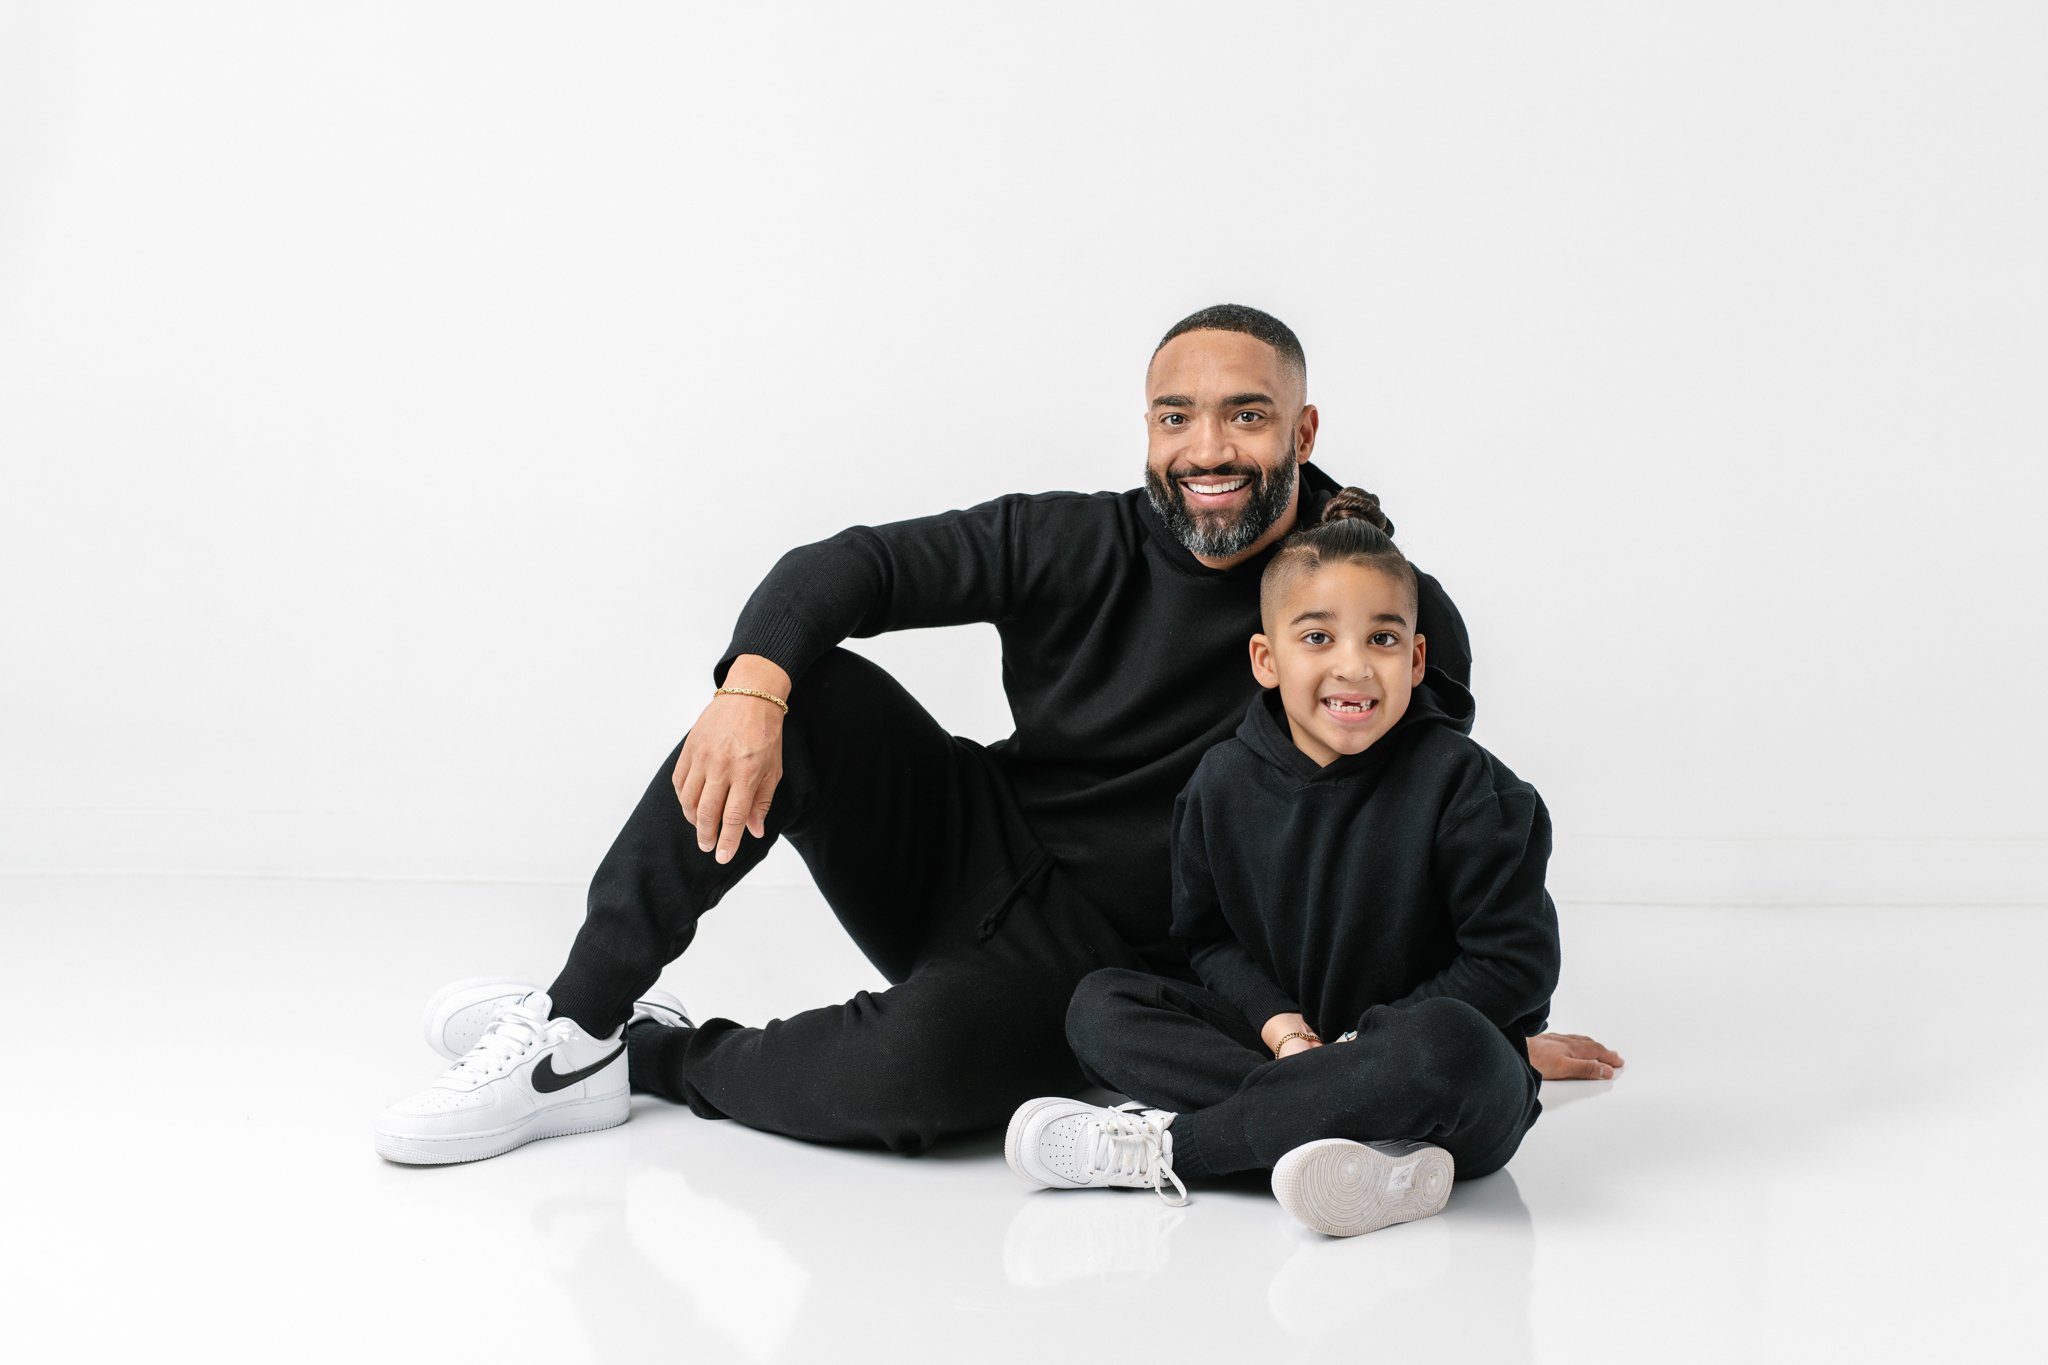  Nicole Hawkins Photography captures a modern studio portrait of a father and son sitting together. simple classic #NicoleHawkinsPhotograaphy #NicoleHawkinsFamilies #Modernfamilypictures #studioportraits #matchingfamilyoutfits #NJphotographer 